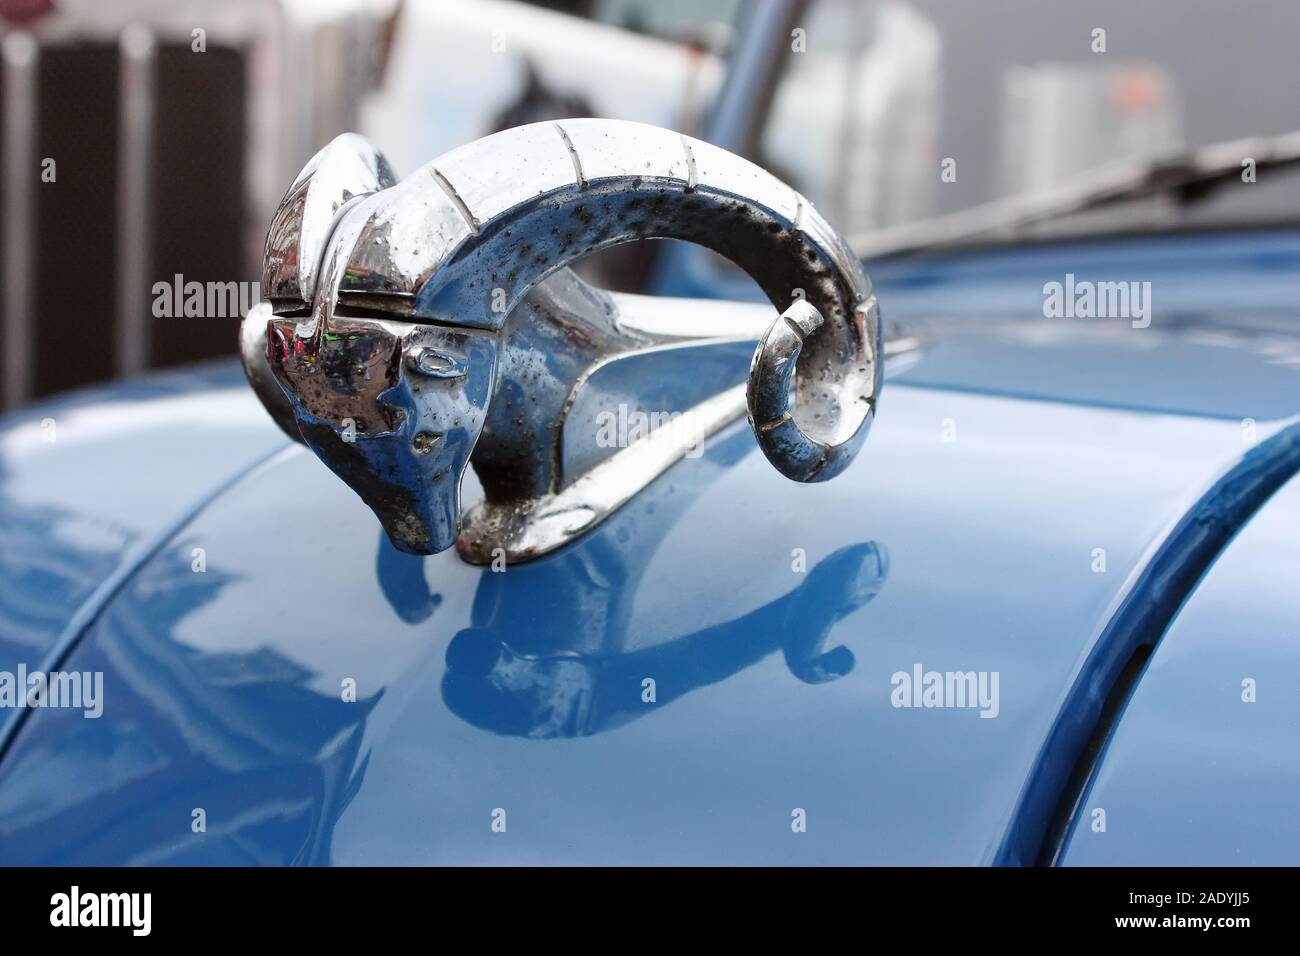 A blue oldtimer Dodge, with the stylized chrome ram hood ornament shown in detail. Stock Photo